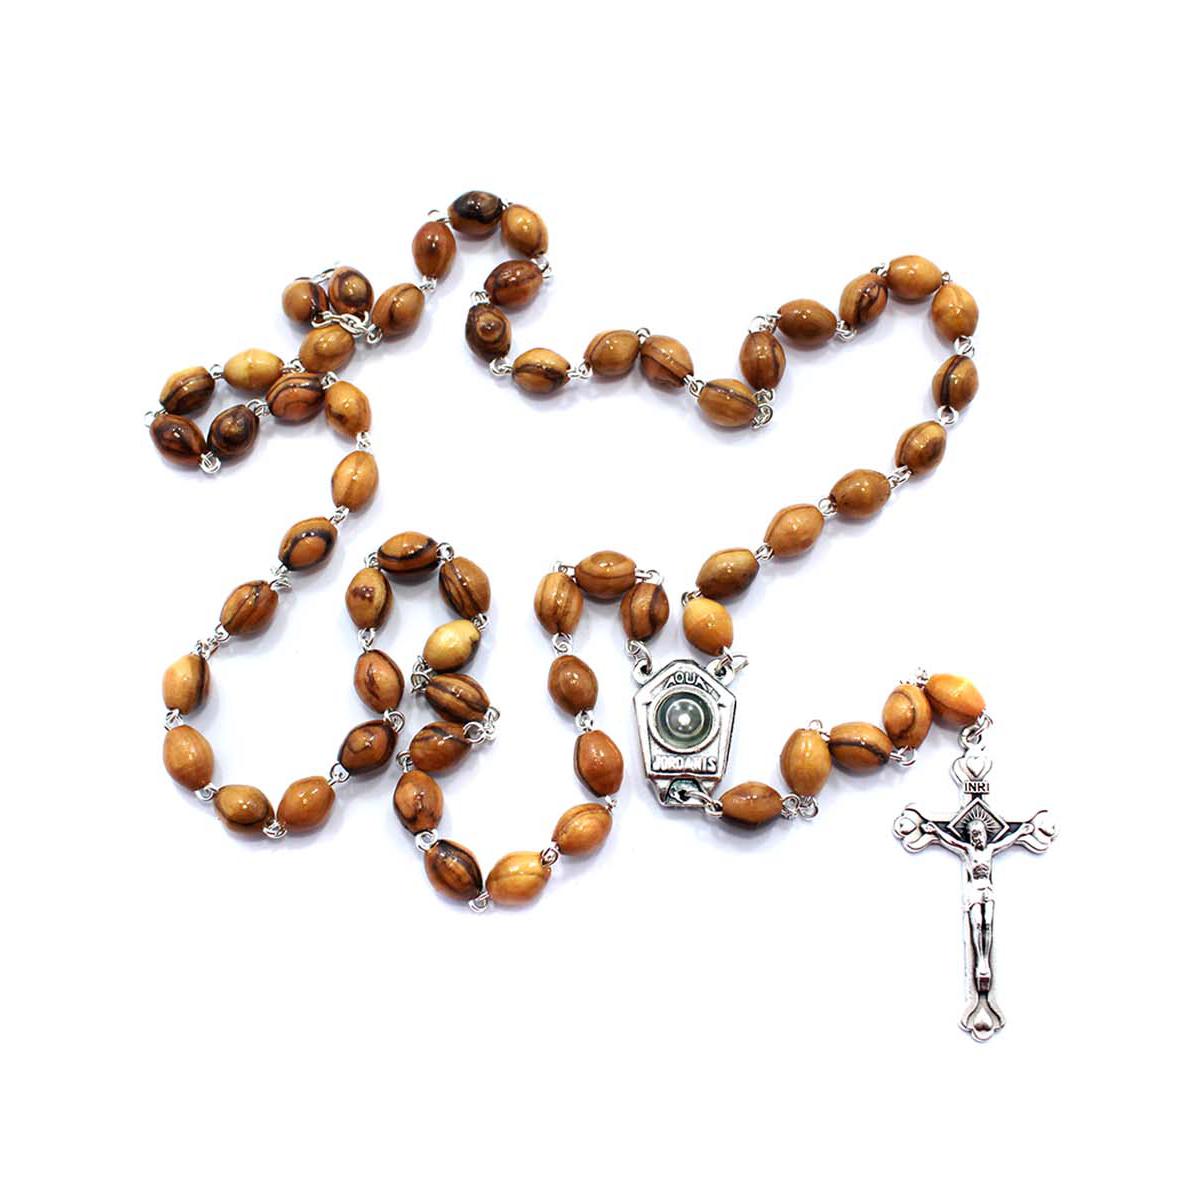 Olive Wood Rosary 59 Beads